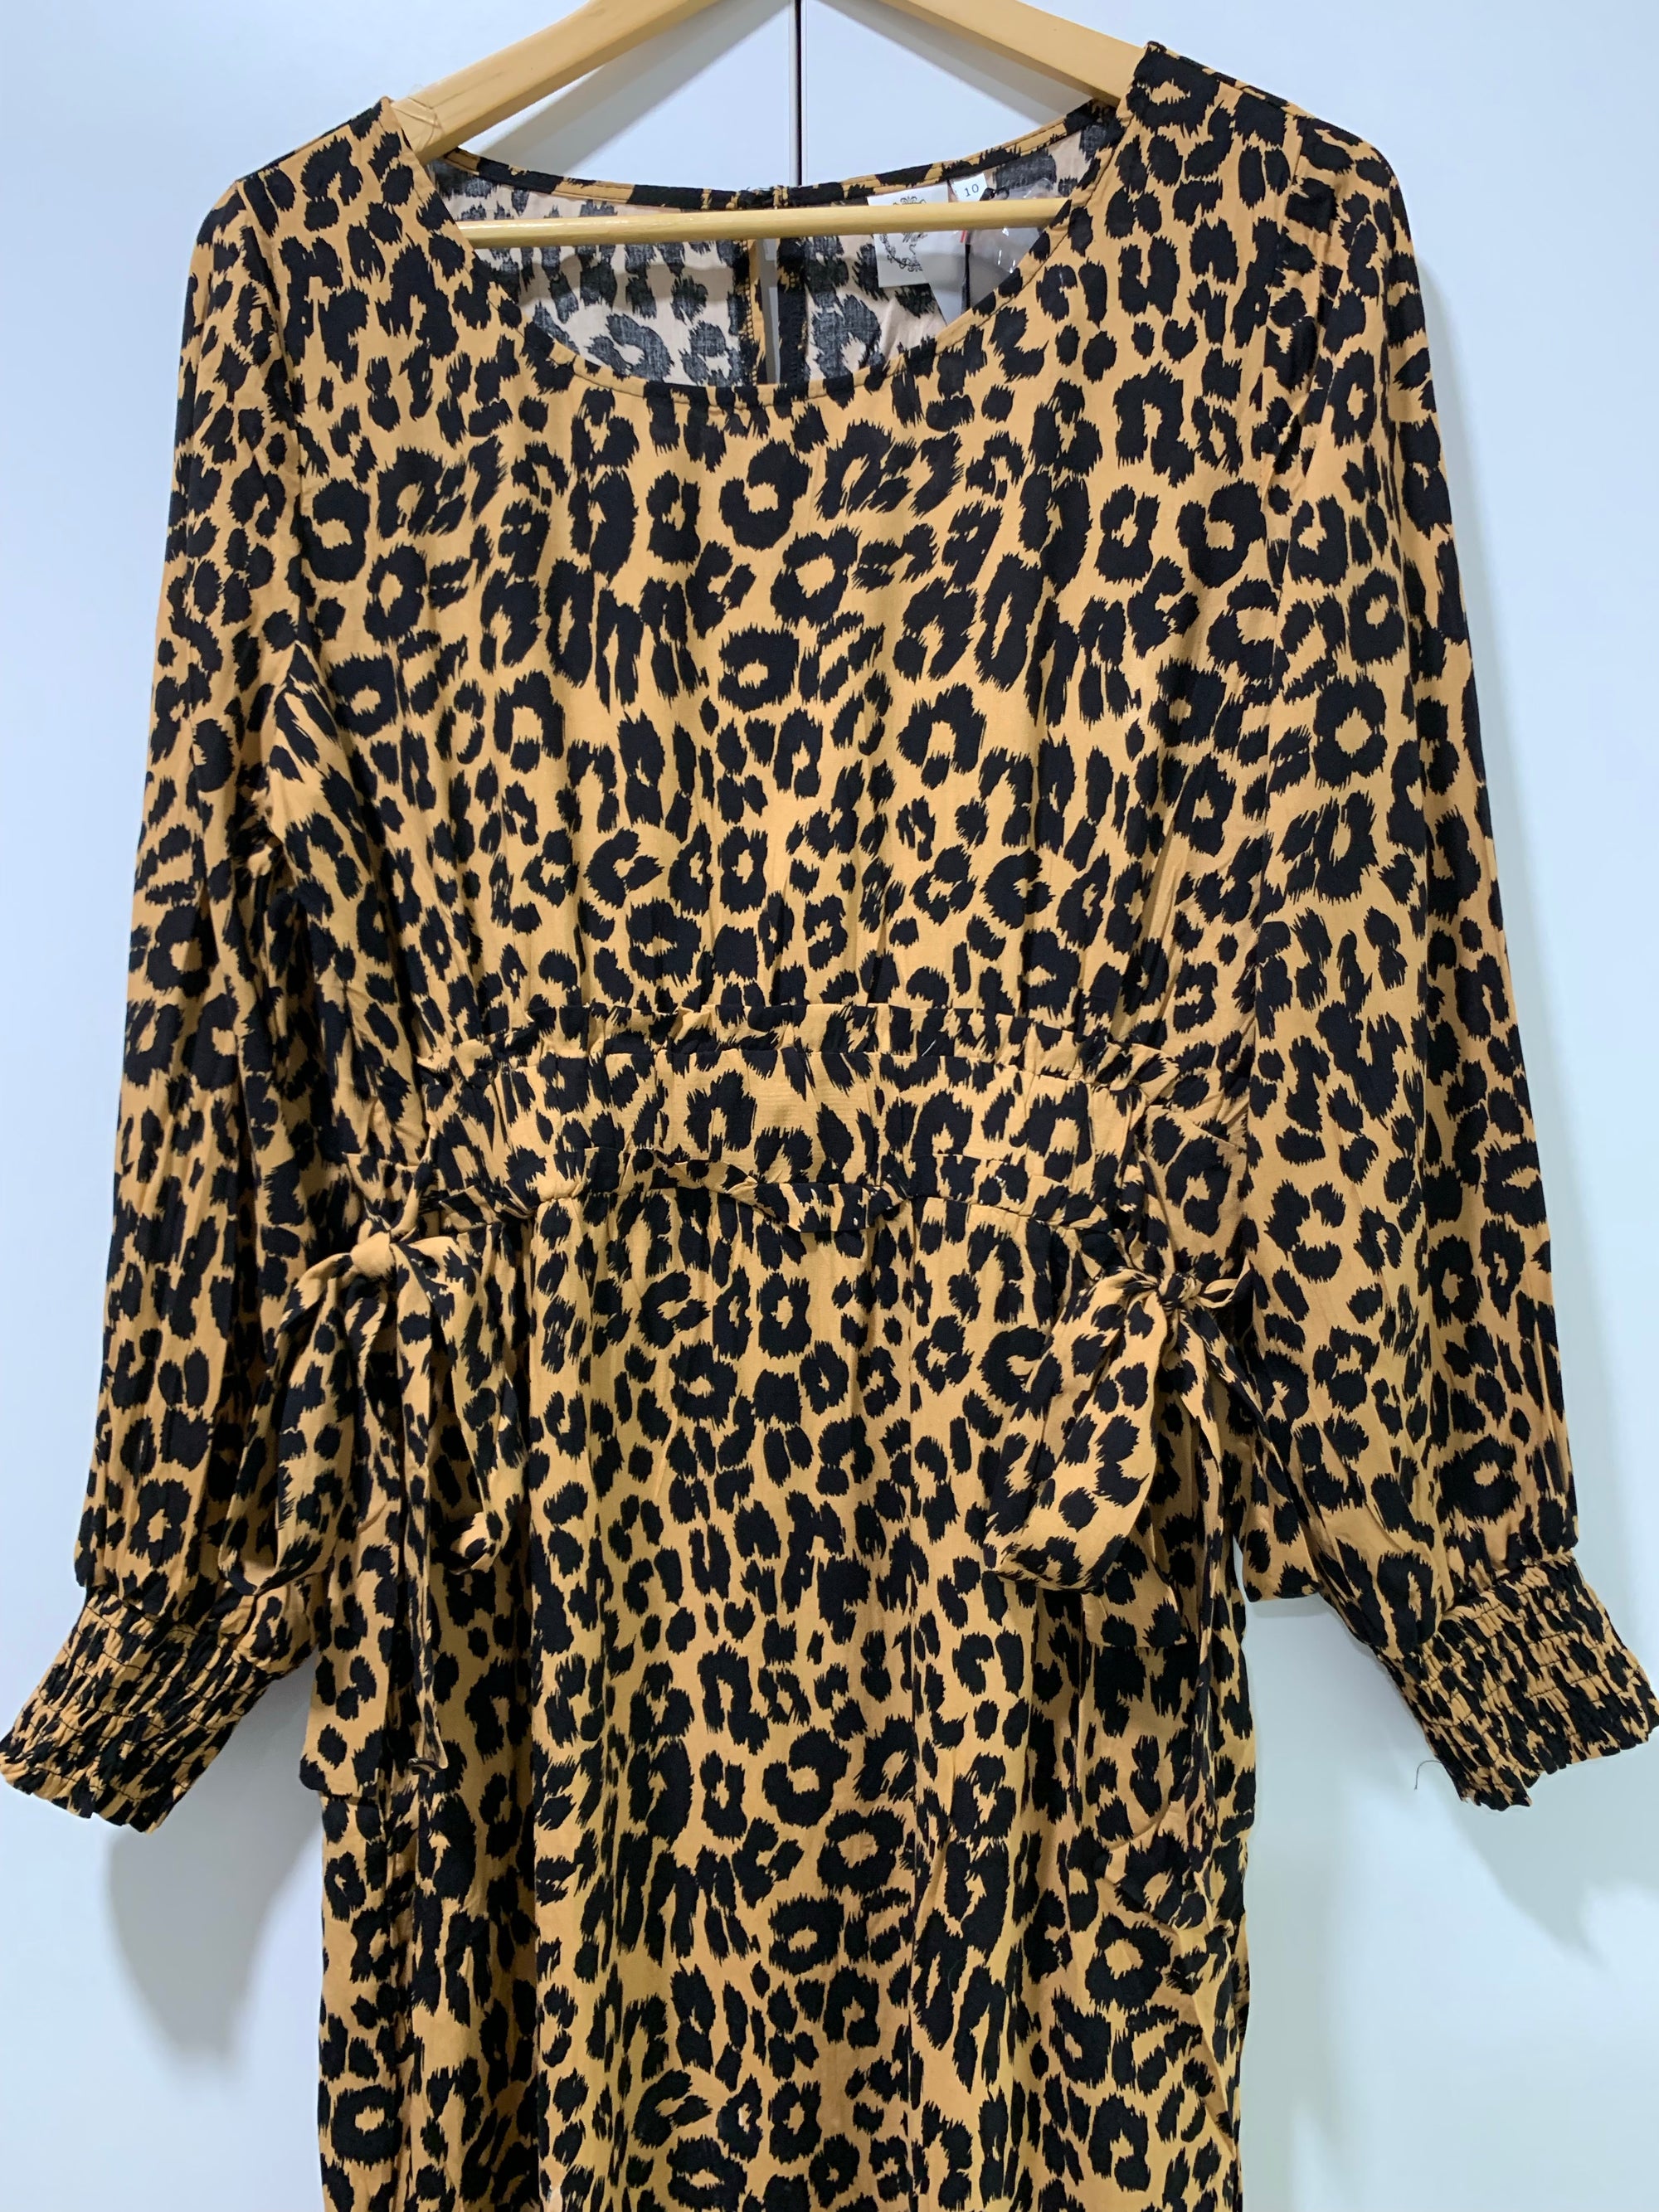 Maxi Dress Black & Tan with Side Ties in Leopard Print Ankle Long with Long Sleeves - Silver Wishes